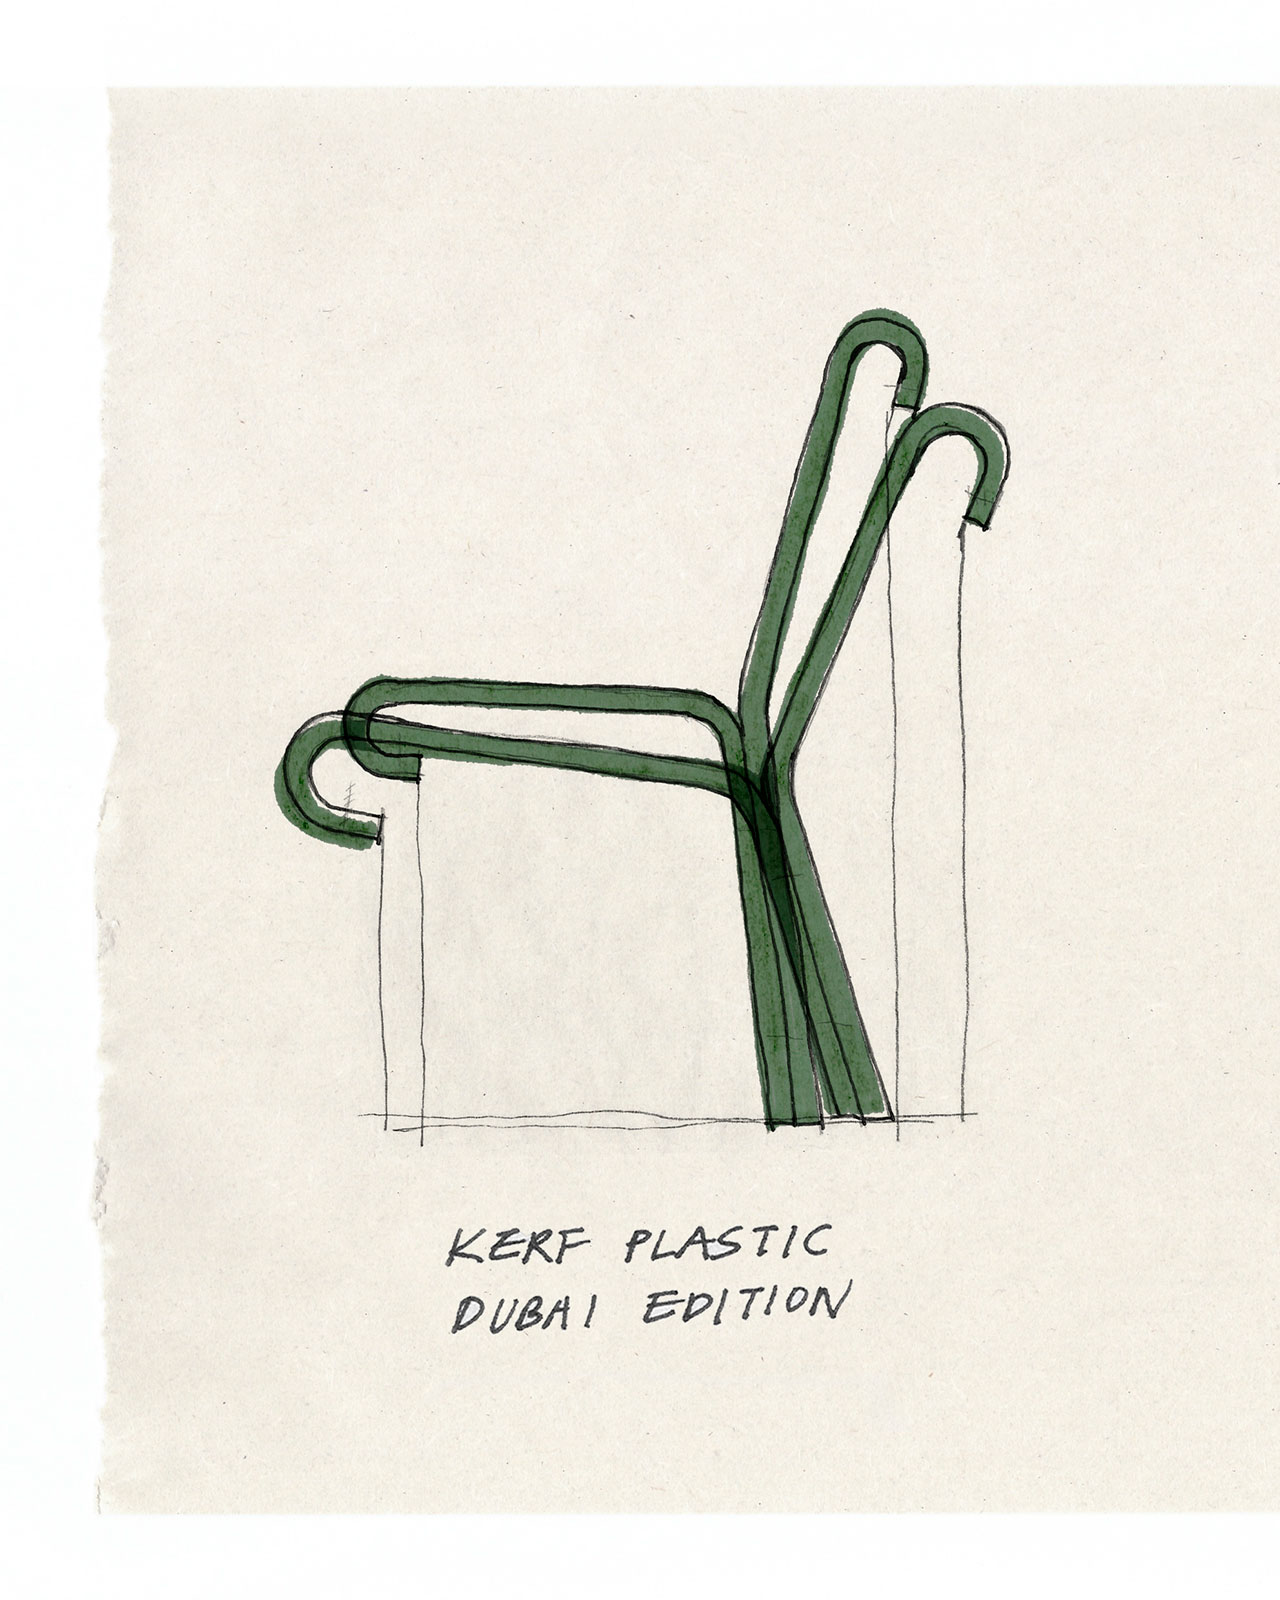 Sketch of Kerf Plastic by Kuo Duo. © Kuo Duo